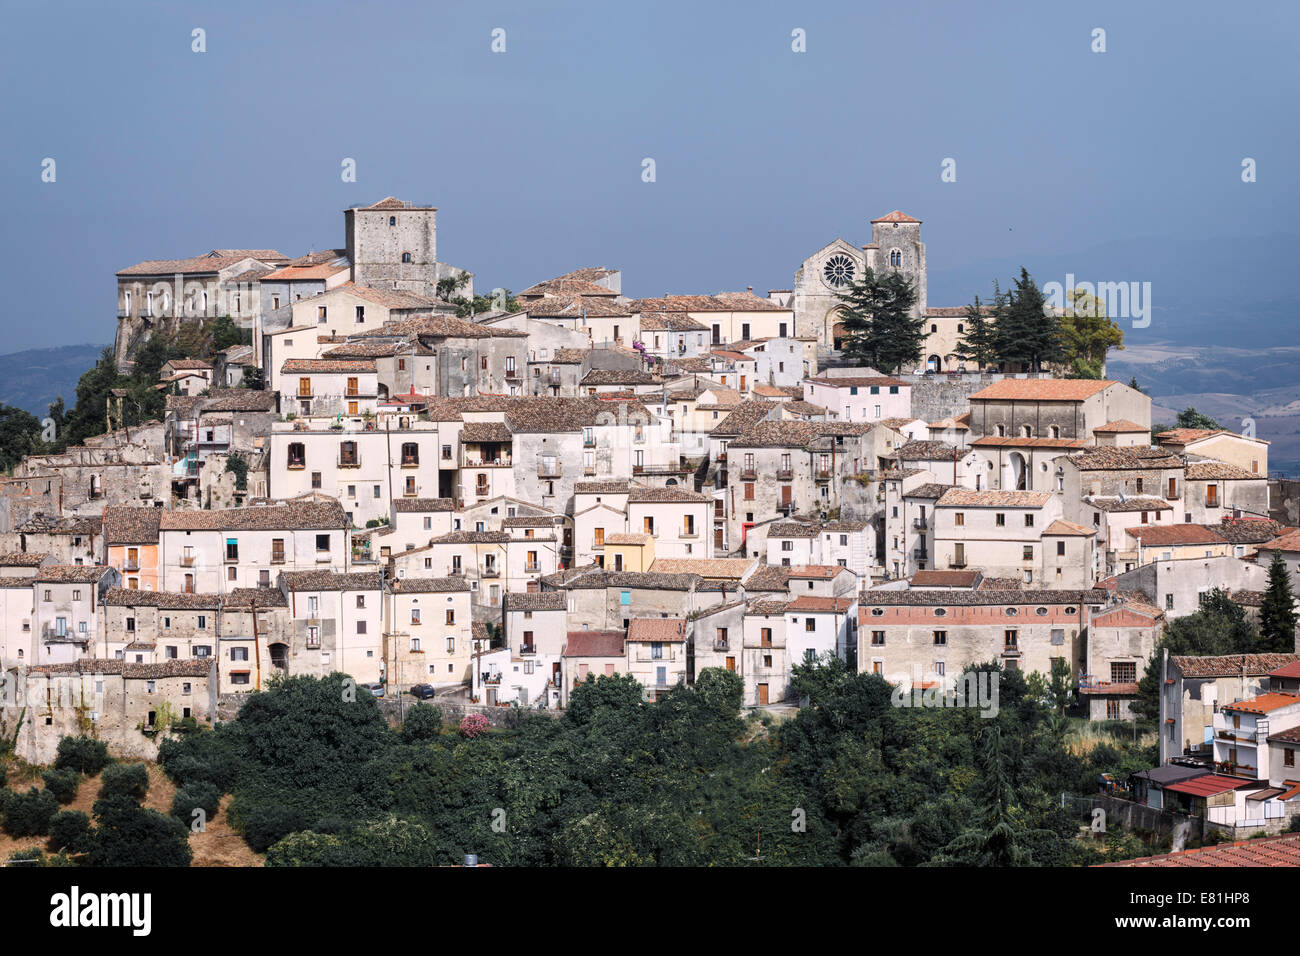 View of the medieval town of Altomonte, Calabria, Italy. Stock Photo